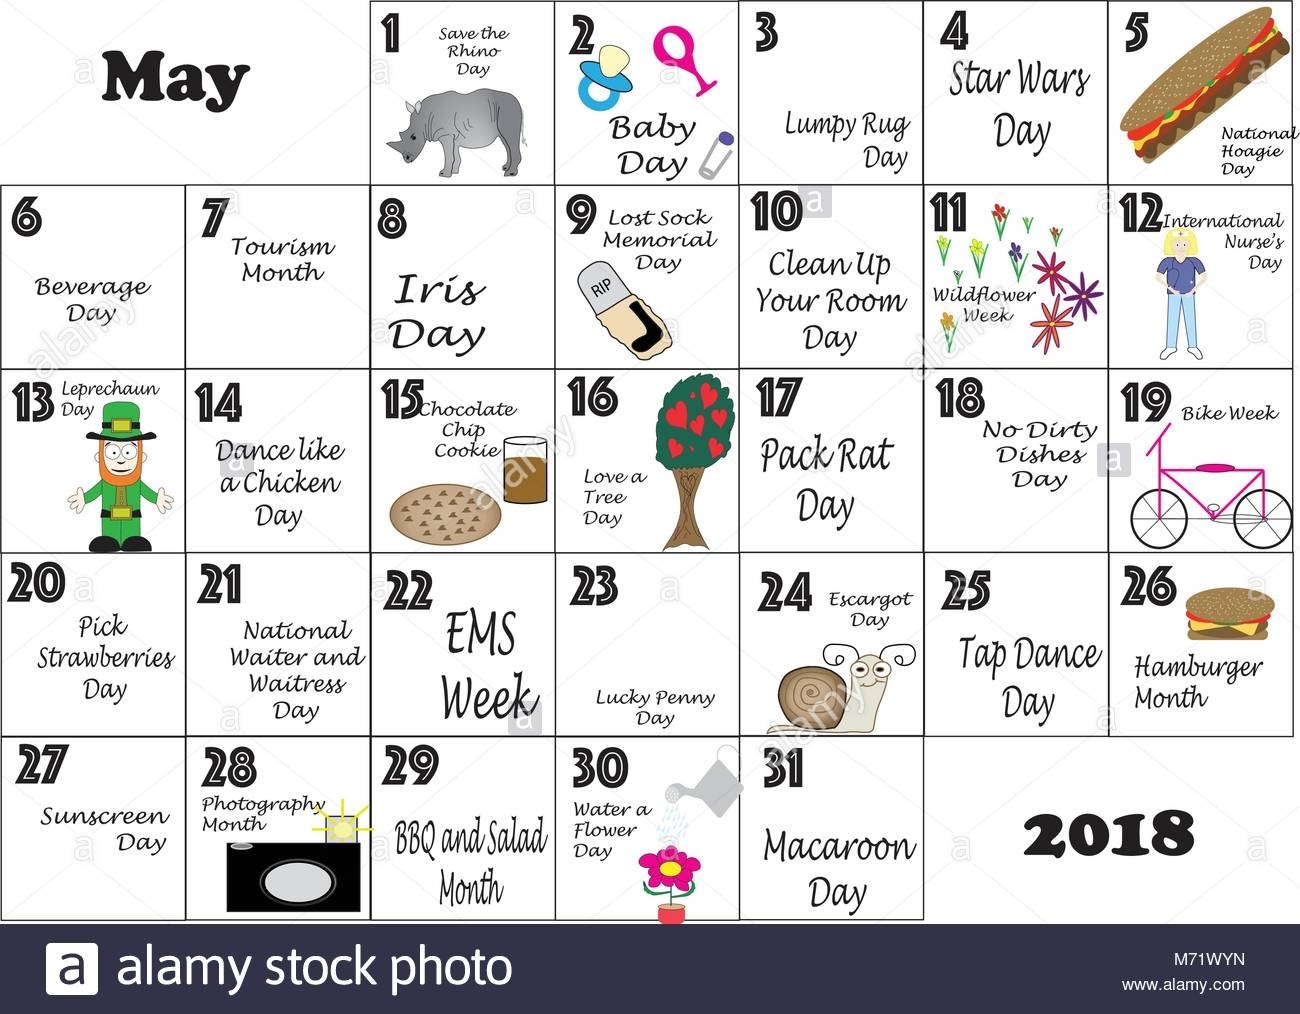 May Monthly Calendar Illustrated And Annotated With Daily Quirky Calendar Of Holidays And Celebrations